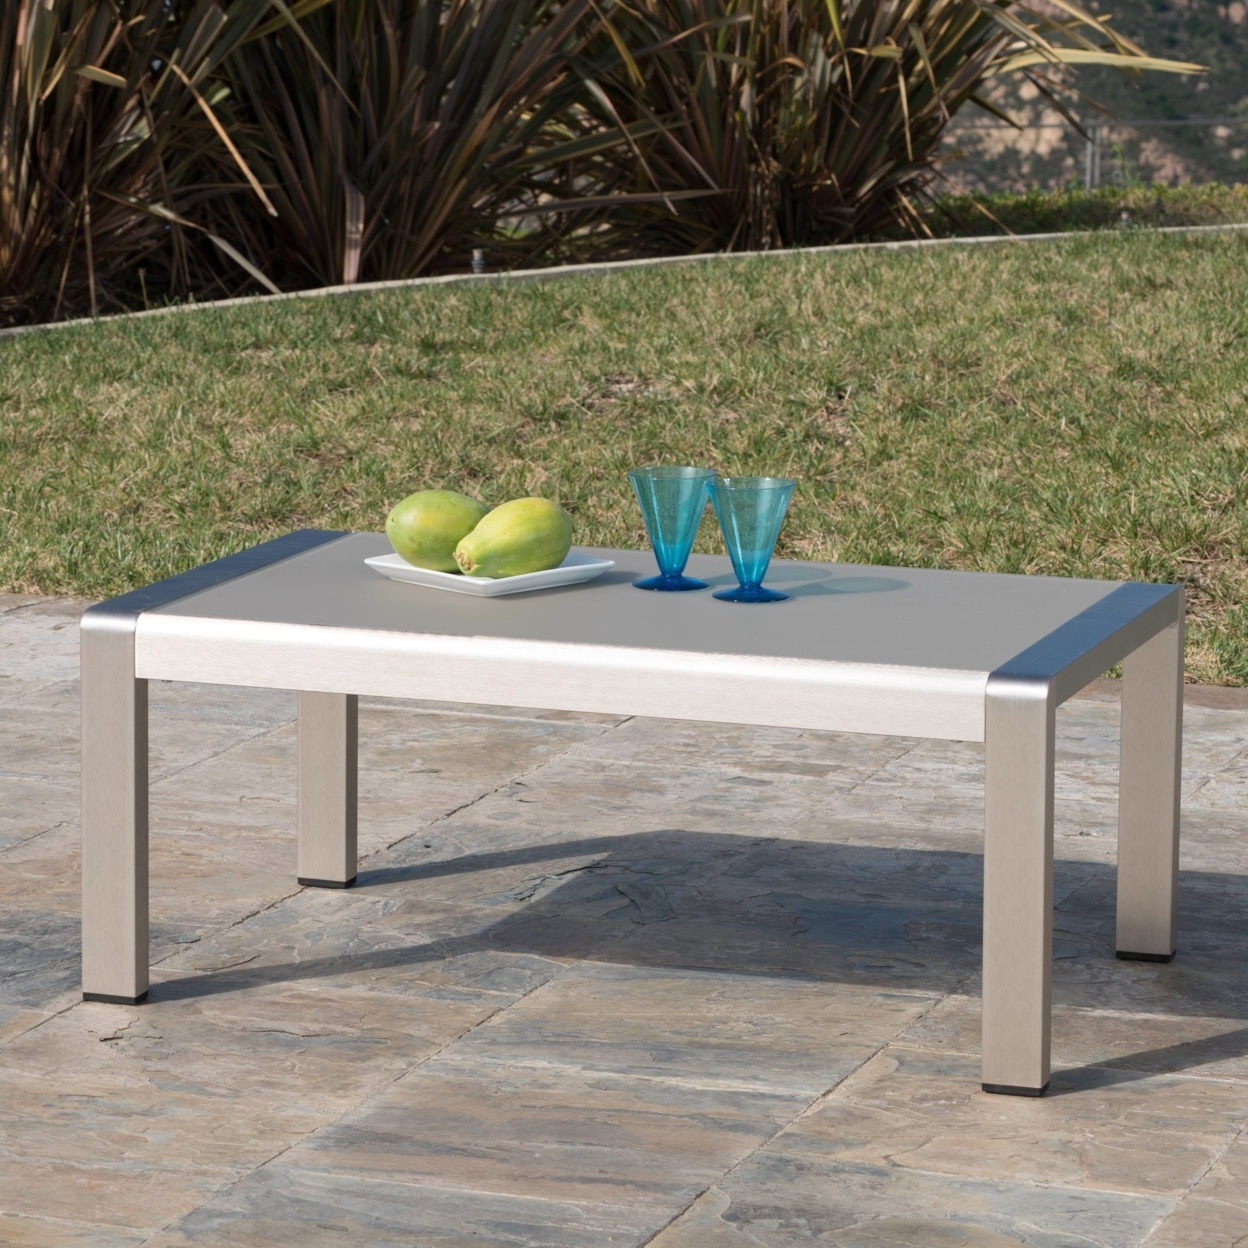 Coral Bay Outdoor Aluminum Coffee Table With Glass Top